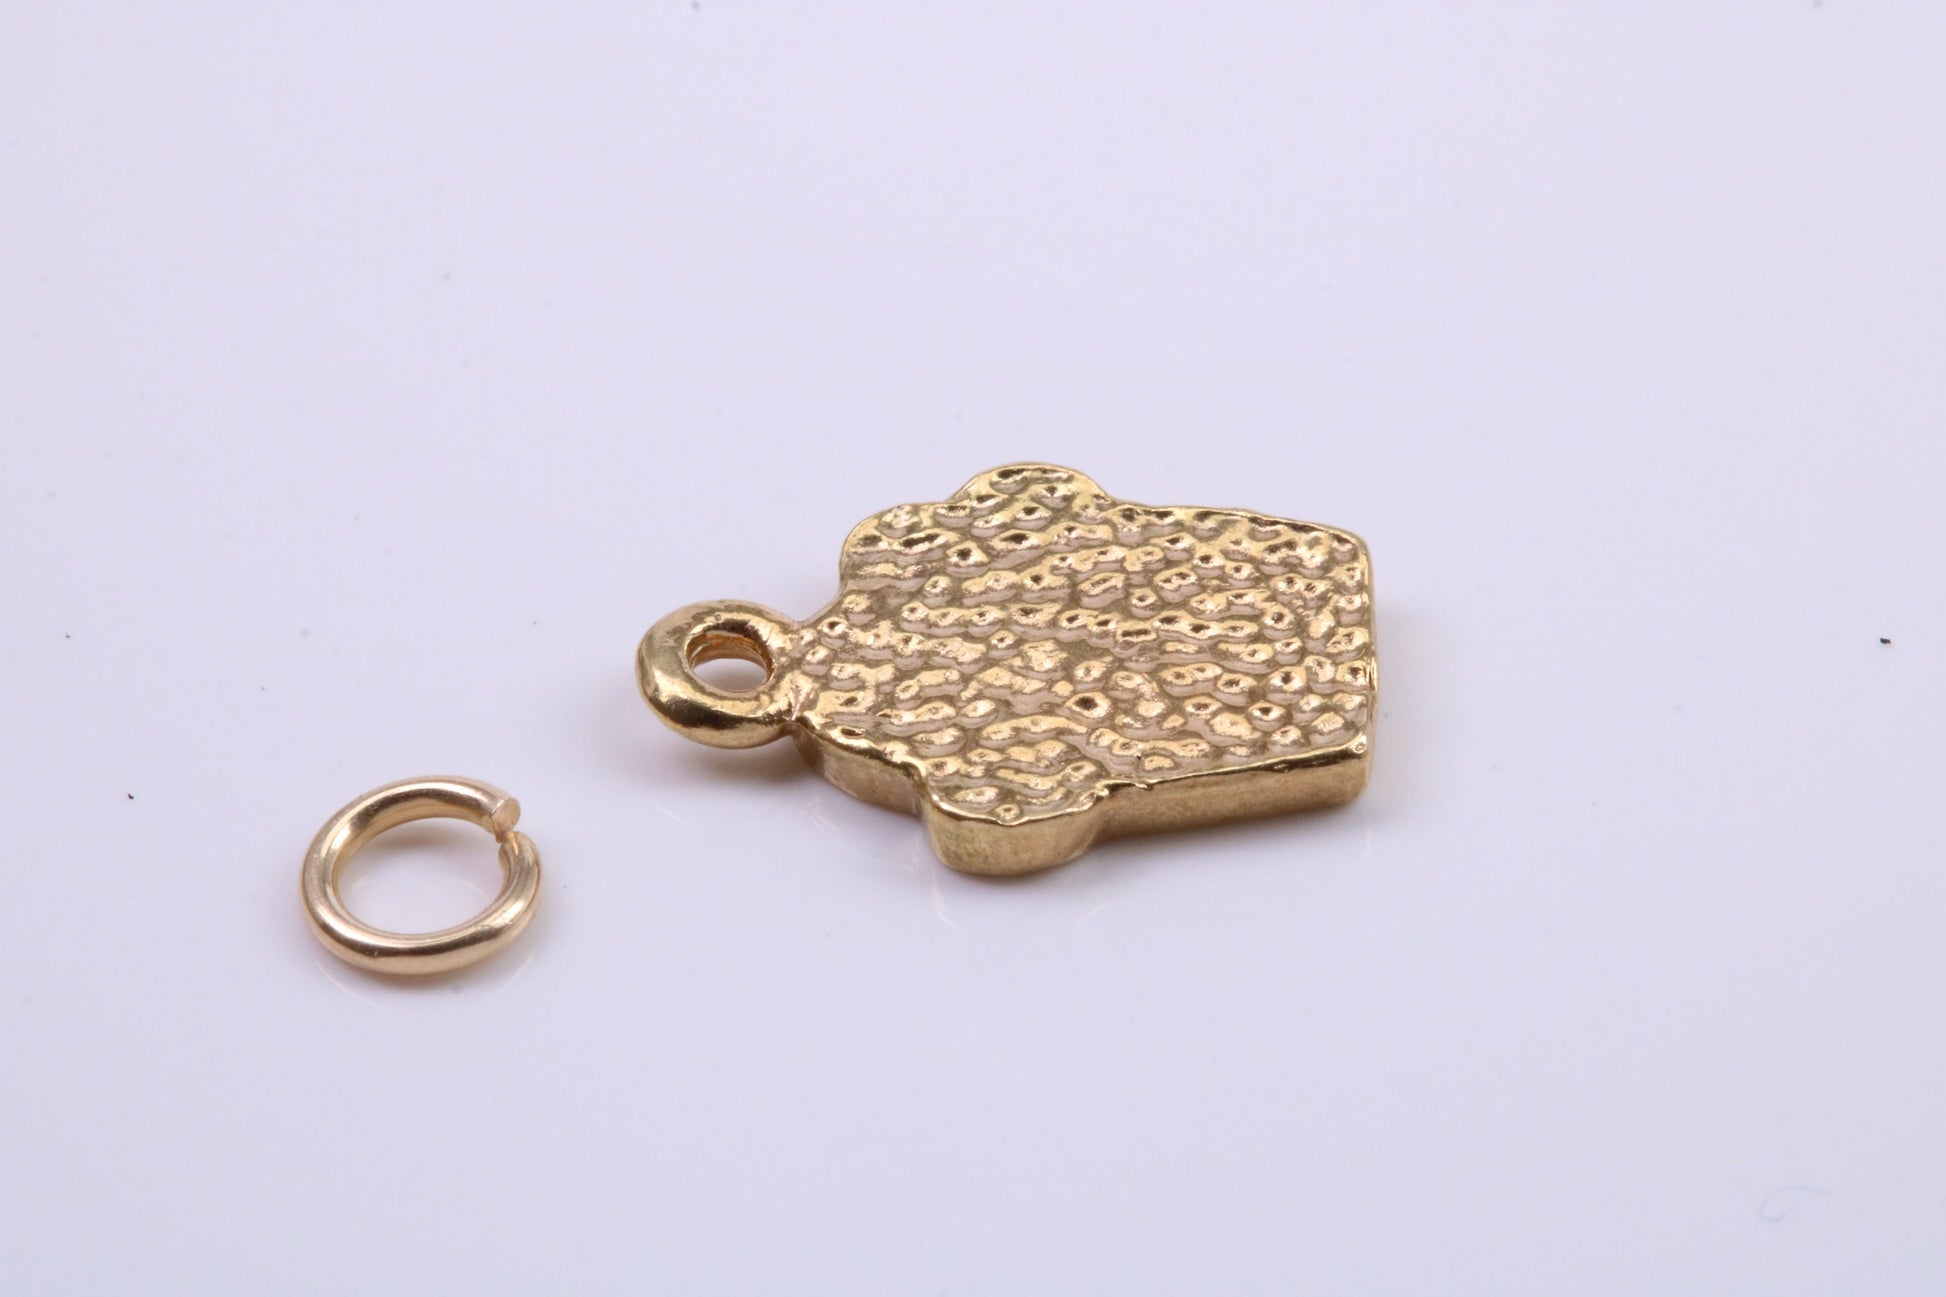 Cup Cake Charm, Traditional Charm, Made from Solid 9ct Yellow Gold, British Hallmarked, Complete with Attachment Link